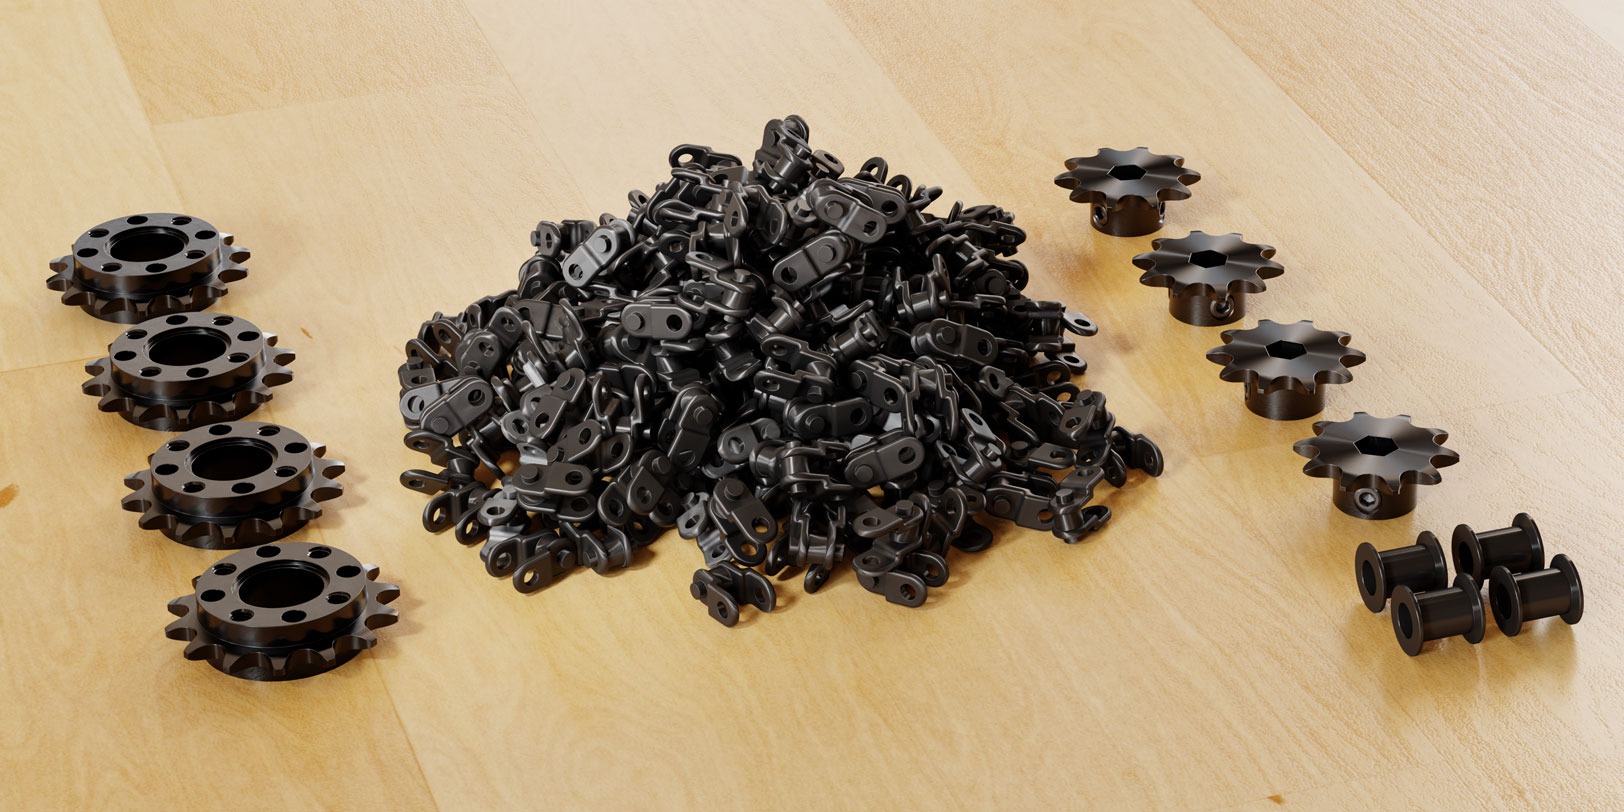 2023-8mm-kit-sprockets-and-chain-2023-1624px.jpg